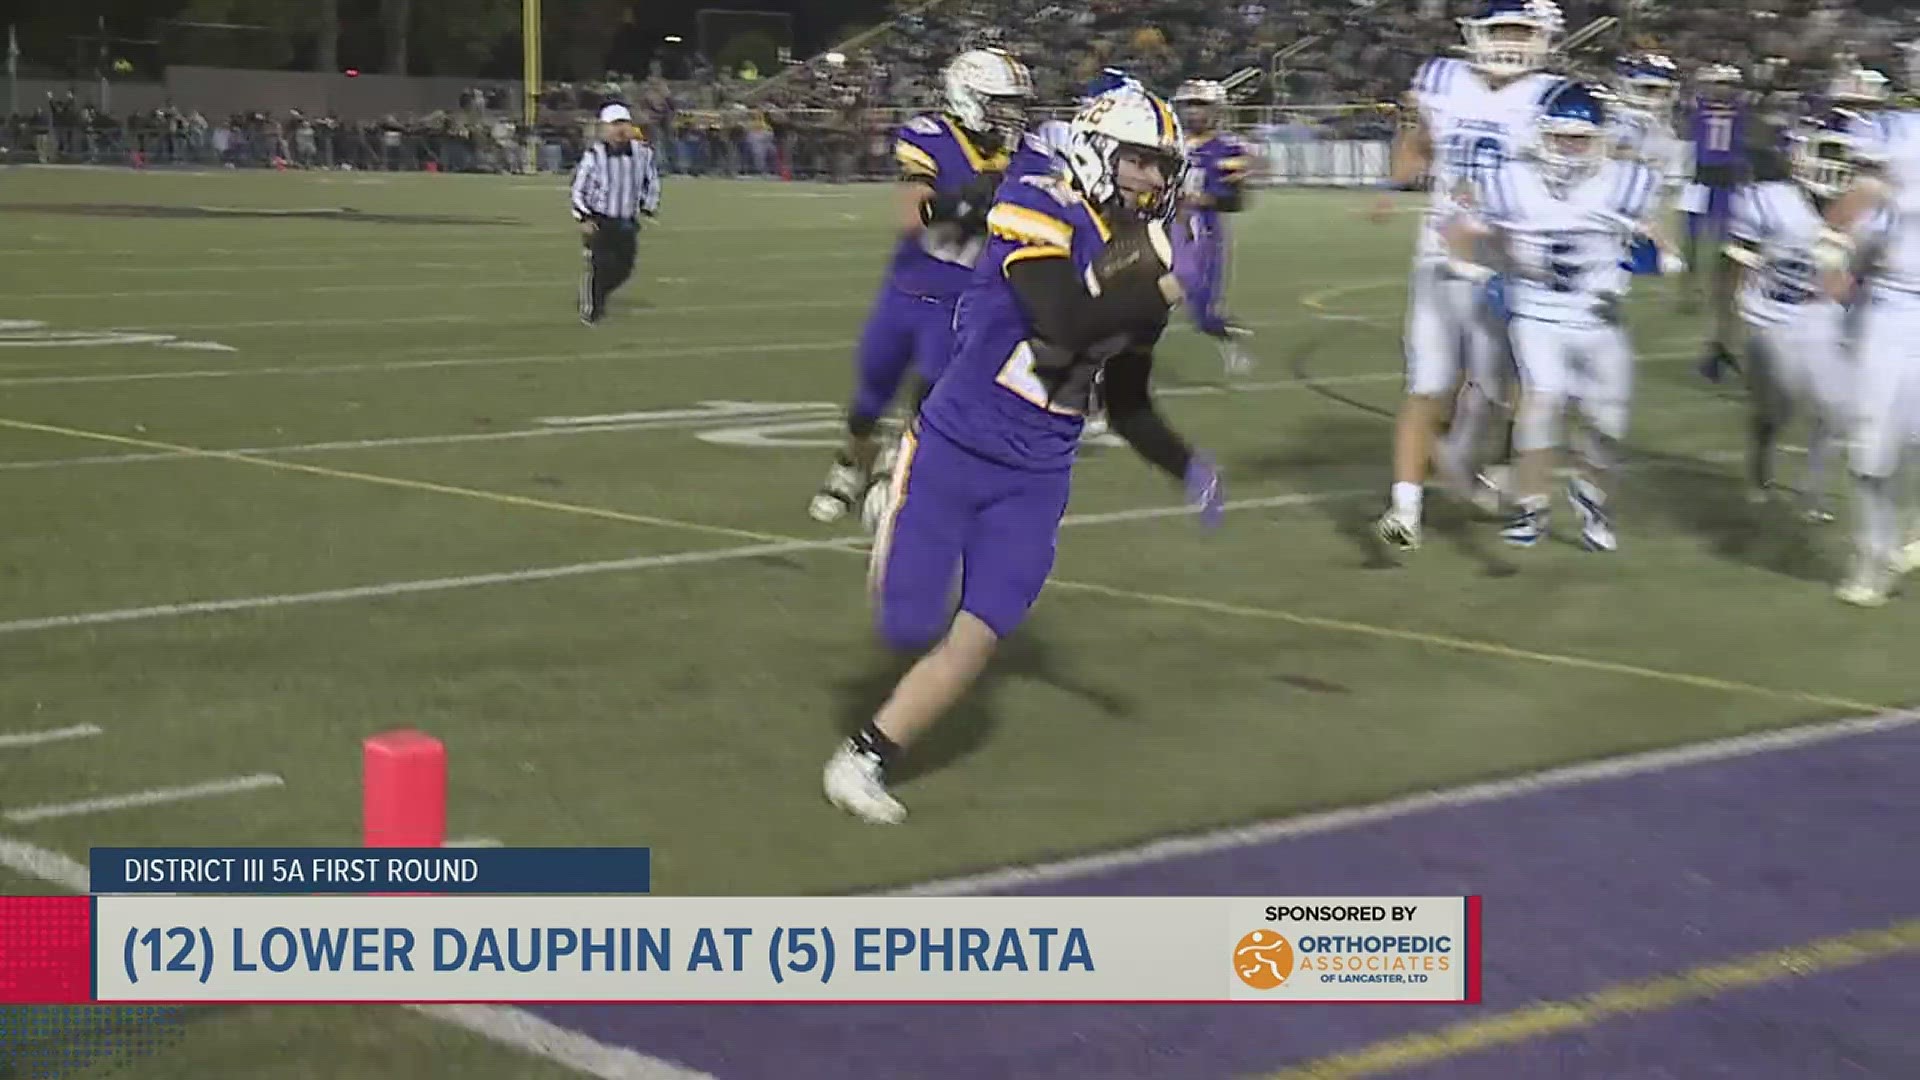 Ephrata wins their program's first-ever playoff game, while Juniata claims a district championship.